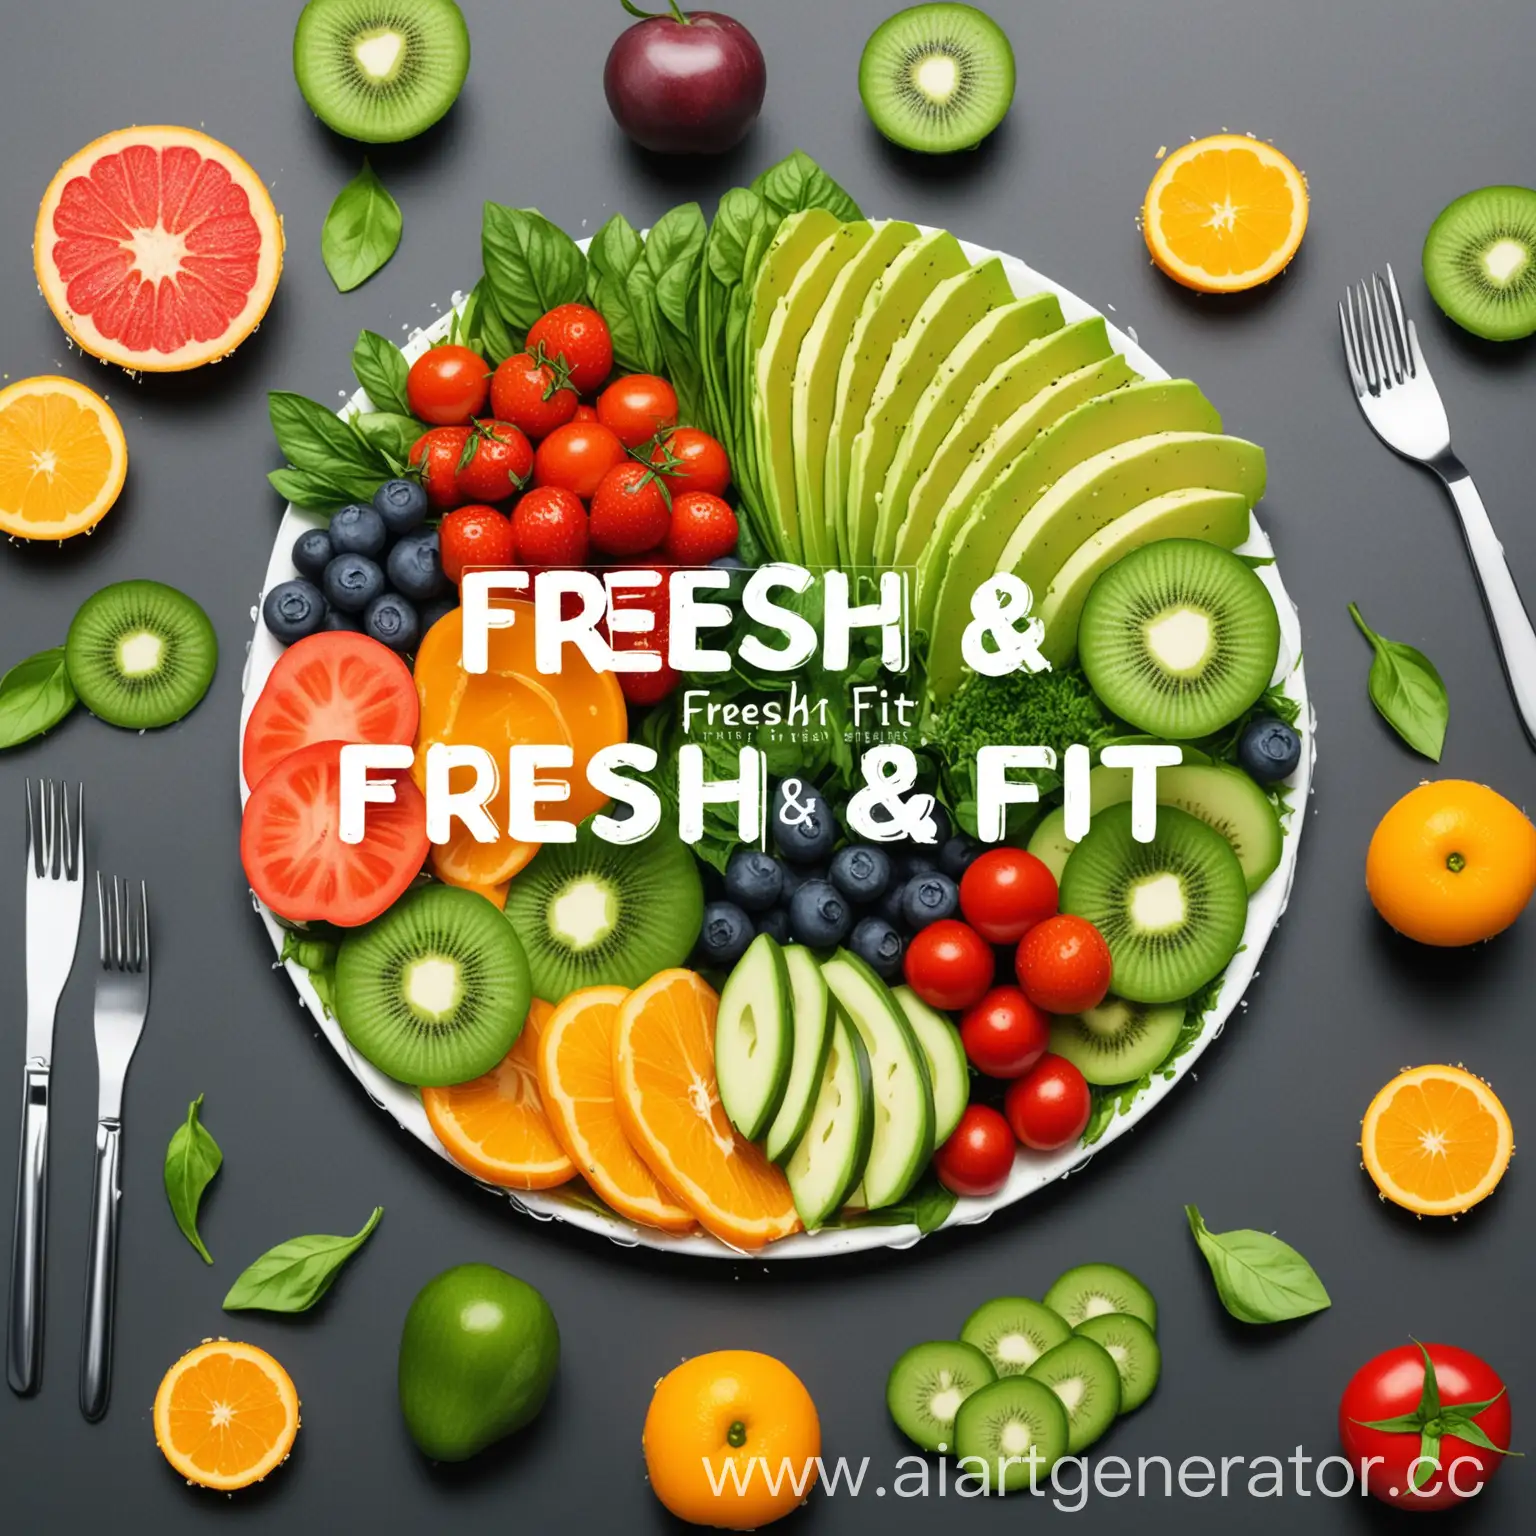 Vibrant-Illustration-of-Fresh-Fit-Healthy-Food-Concept